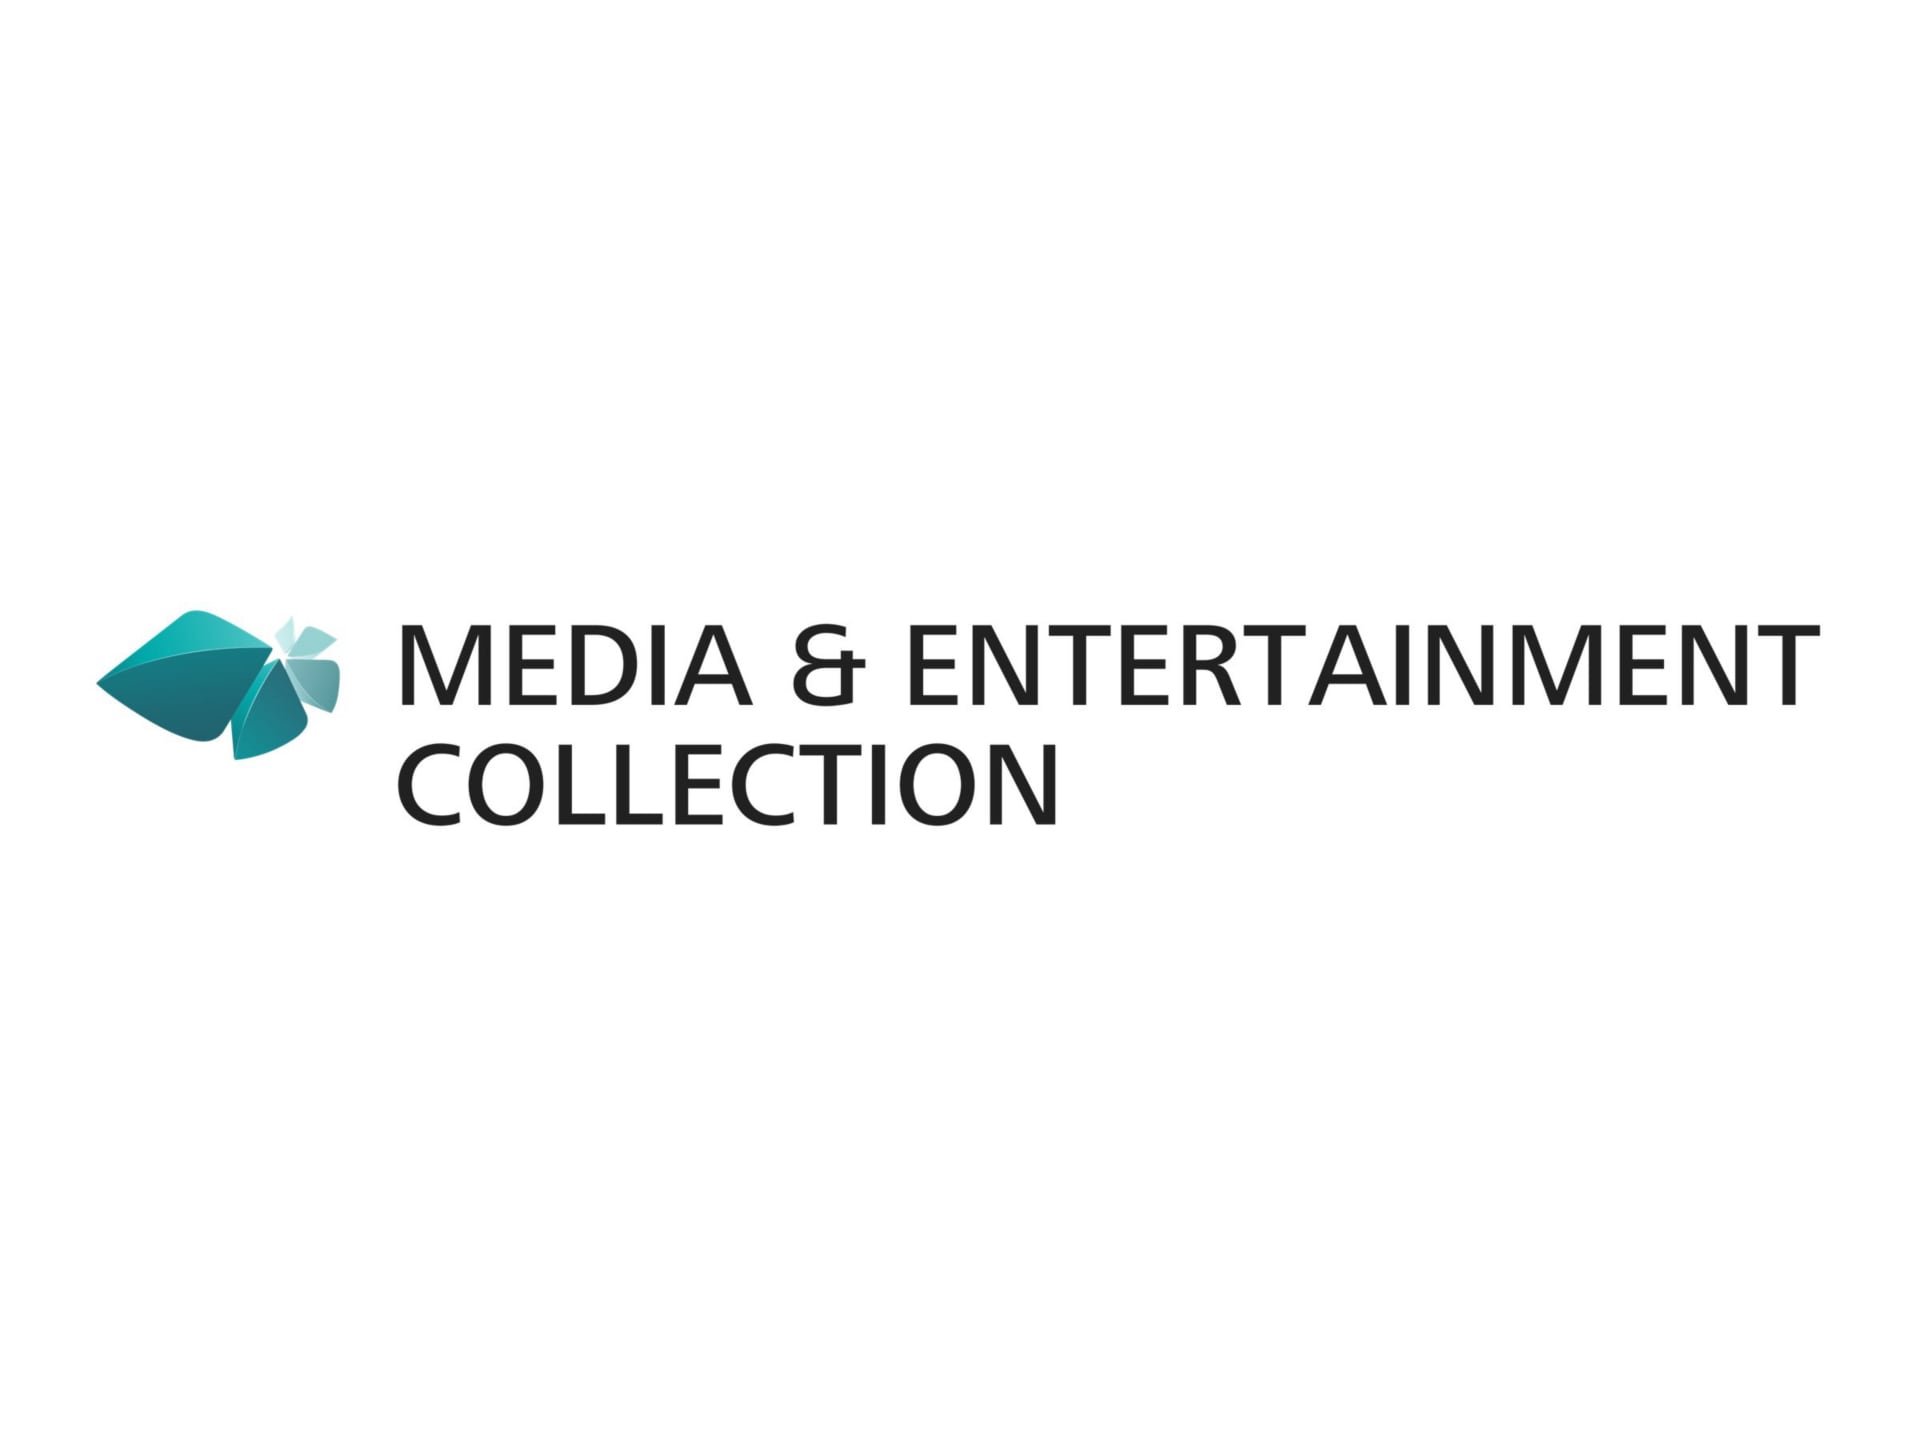 Autodesk Media & Entertainment Collection - Subscription Renewal (annual) - 1 seat